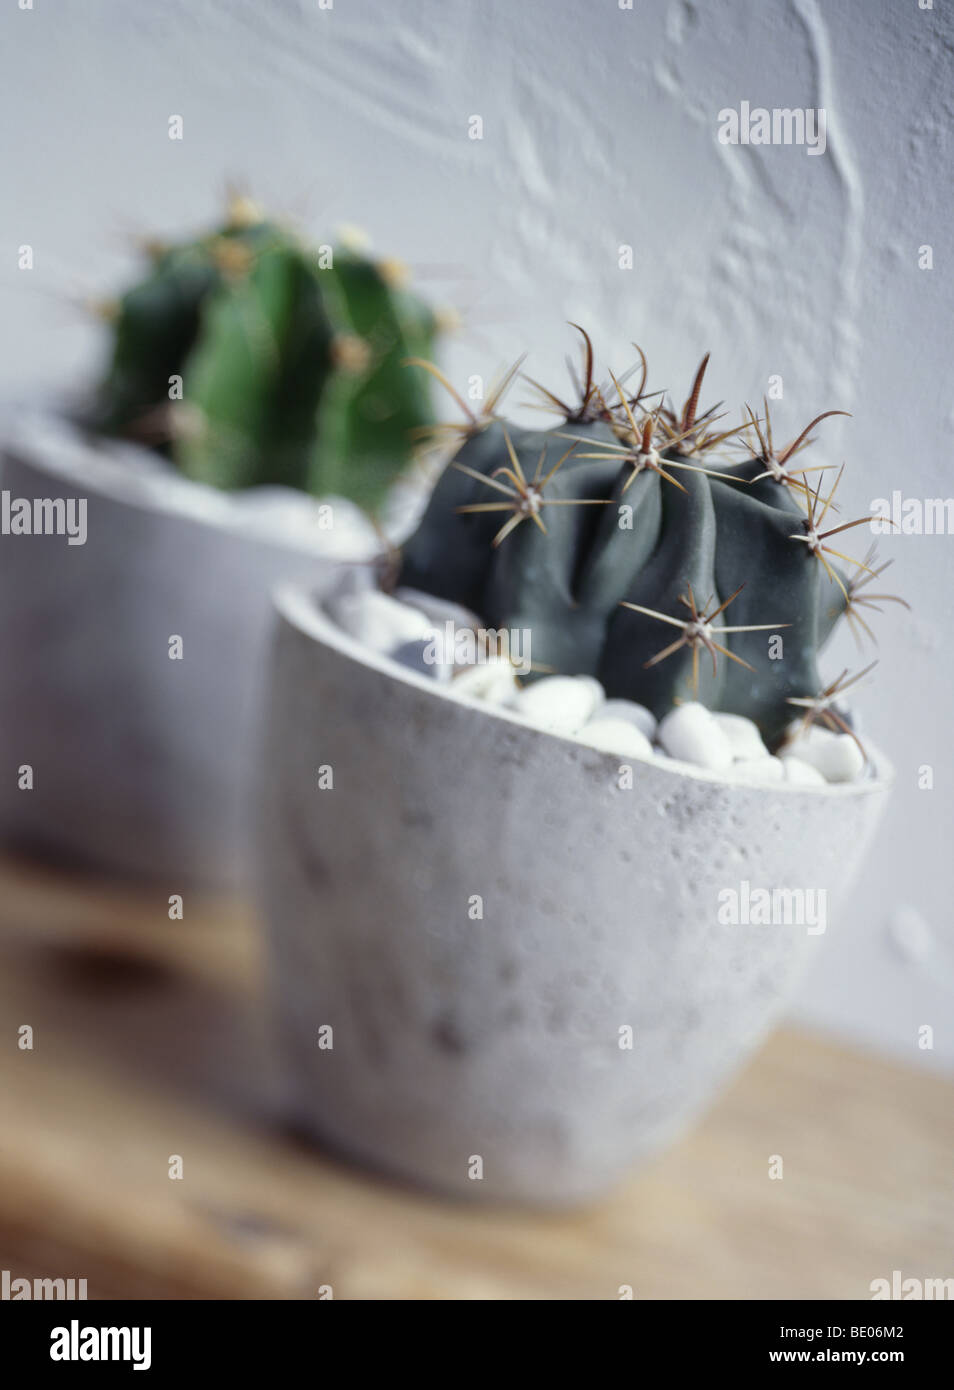 cactus potted Stock Photo